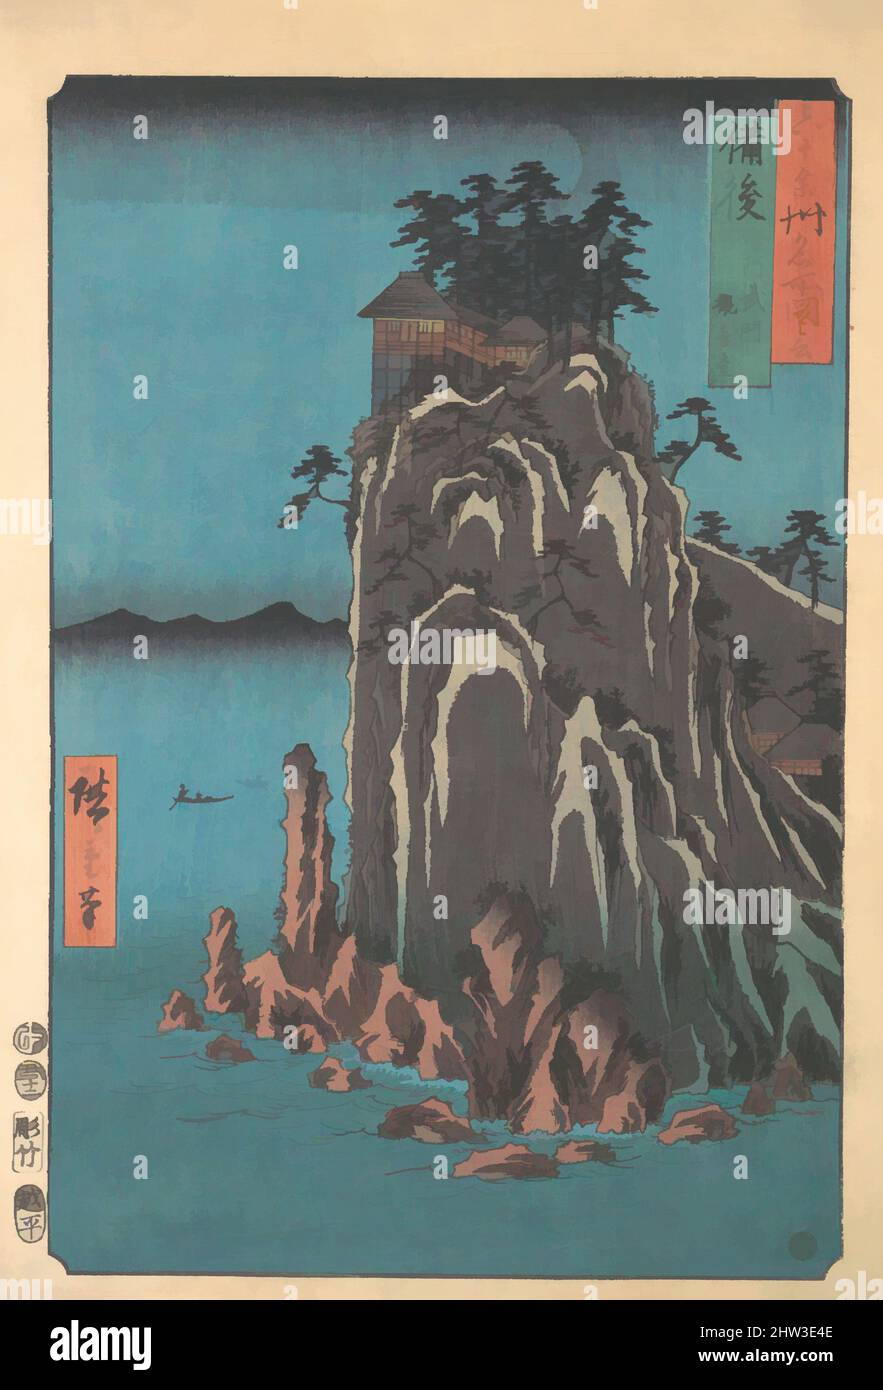 Art inspired by 六十余州名所図会　備後　阿武門観音堂, Kannondo, Abuto, Bingo Province, from the series Views of Famous Places in the Sixty-Odd Provinces, Edo period (1615–1868), ca. 1853, Japan, Polychrome woodblock print; ink and color on paper, H. 14 5/8 in. (37.1 cm); W. 10 1/15 in. (25.6 cm), Prints, Classic works modernized by Artotop with a splash of modernity. Shapes, color and value, eye-catching visual impact on art. Emotions through freedom of artworks in a contemporary way. A timeless message pursuing a wildly creative new direction. Artists turning to the digital medium and creating the Artotop NFT Stock Photo